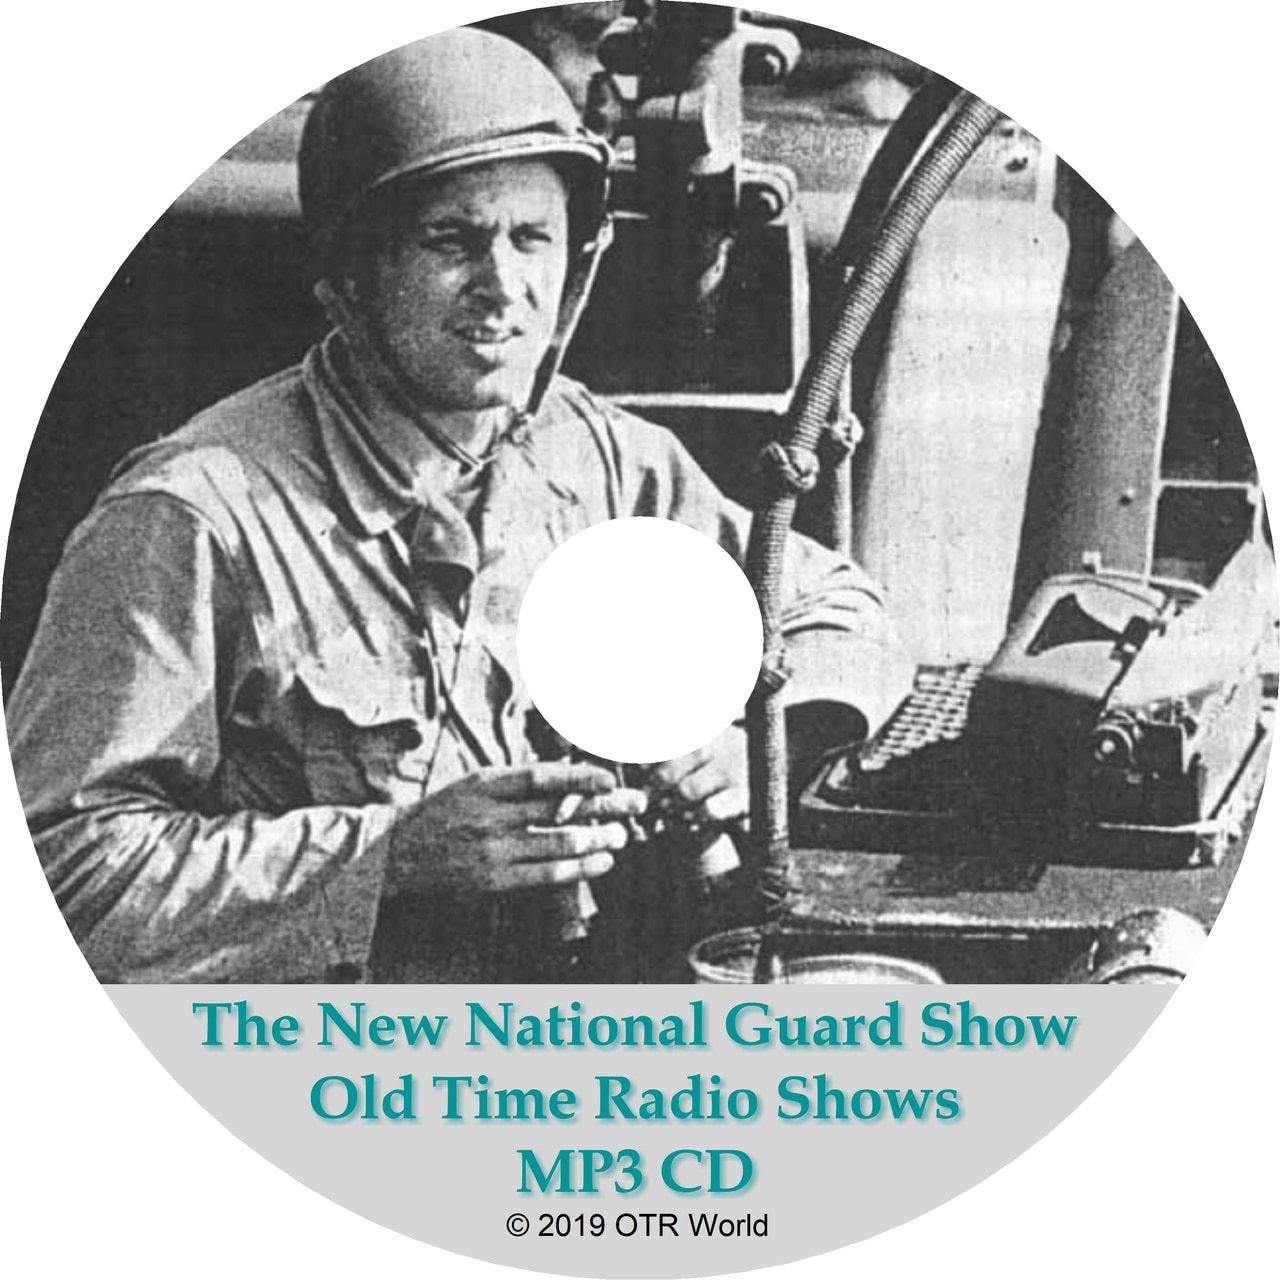 New National Guard Show Old Time Radio Shows OTR 30 Episodes MP3 CD-R - OTR World